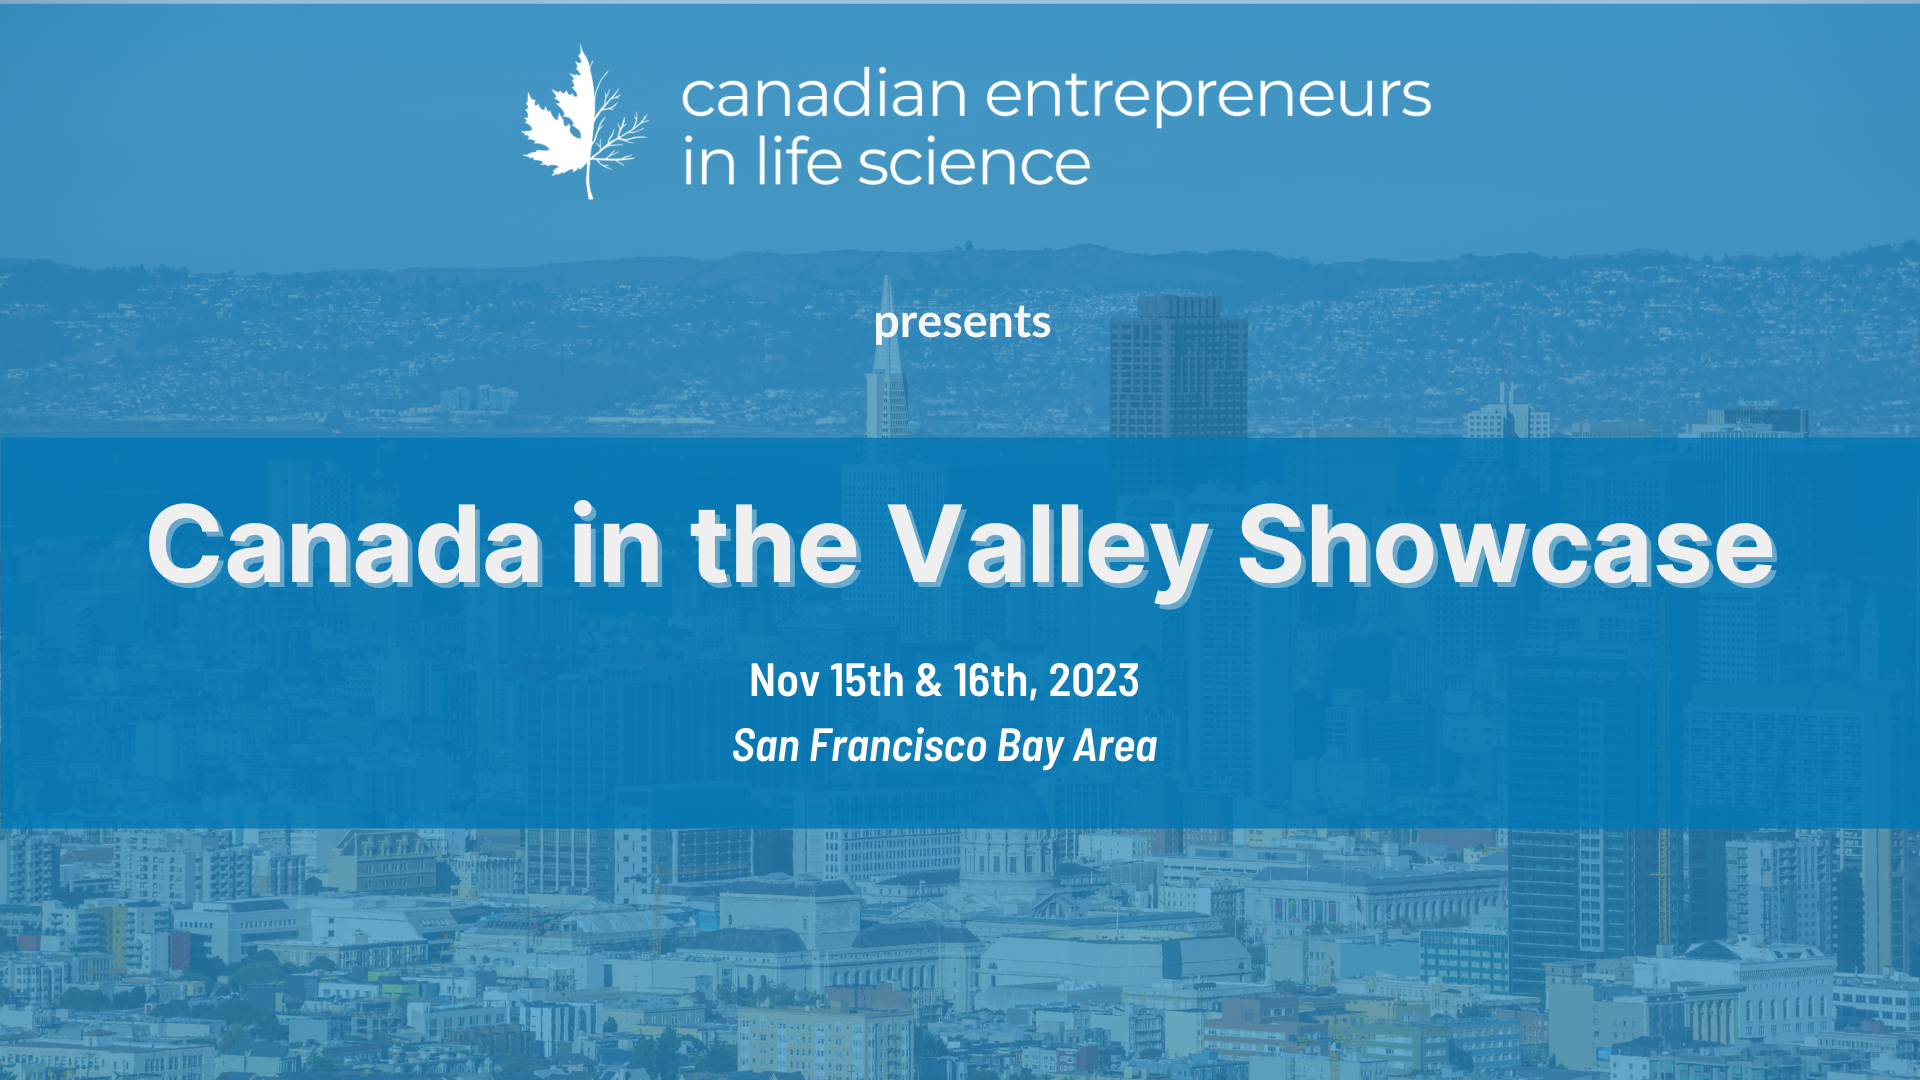 Cover Image for Showcase in Canadian Entrepreneurs in Life Science (CELS)